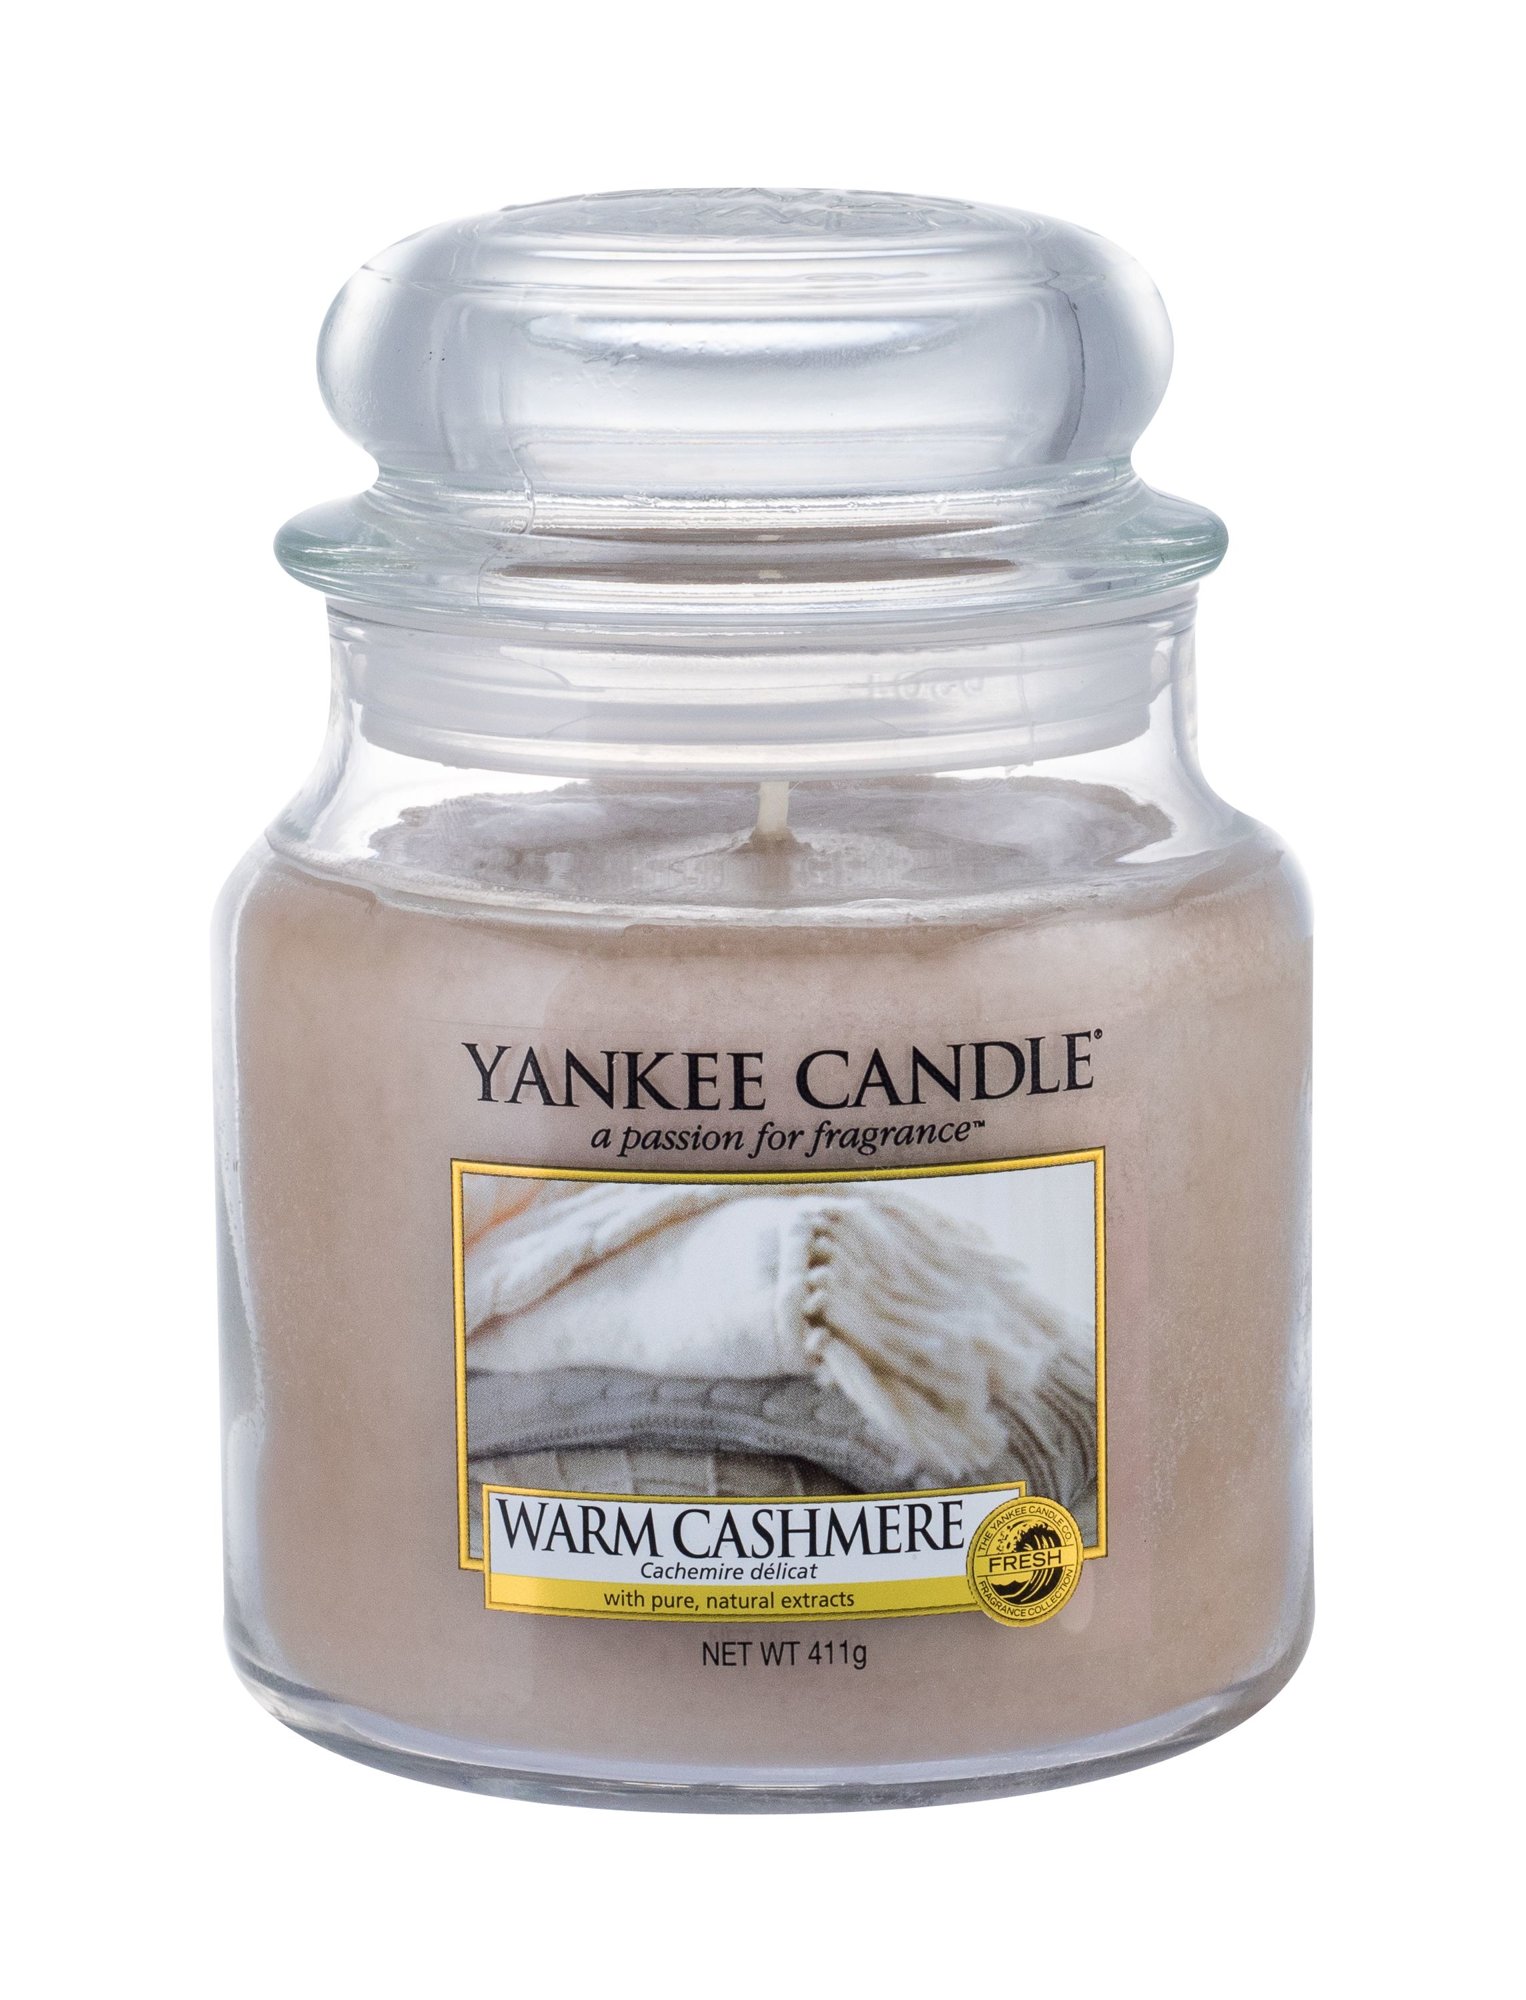 Yankee Candle Warm Cashmere 411g Kvepalai Unisex Scented Candle